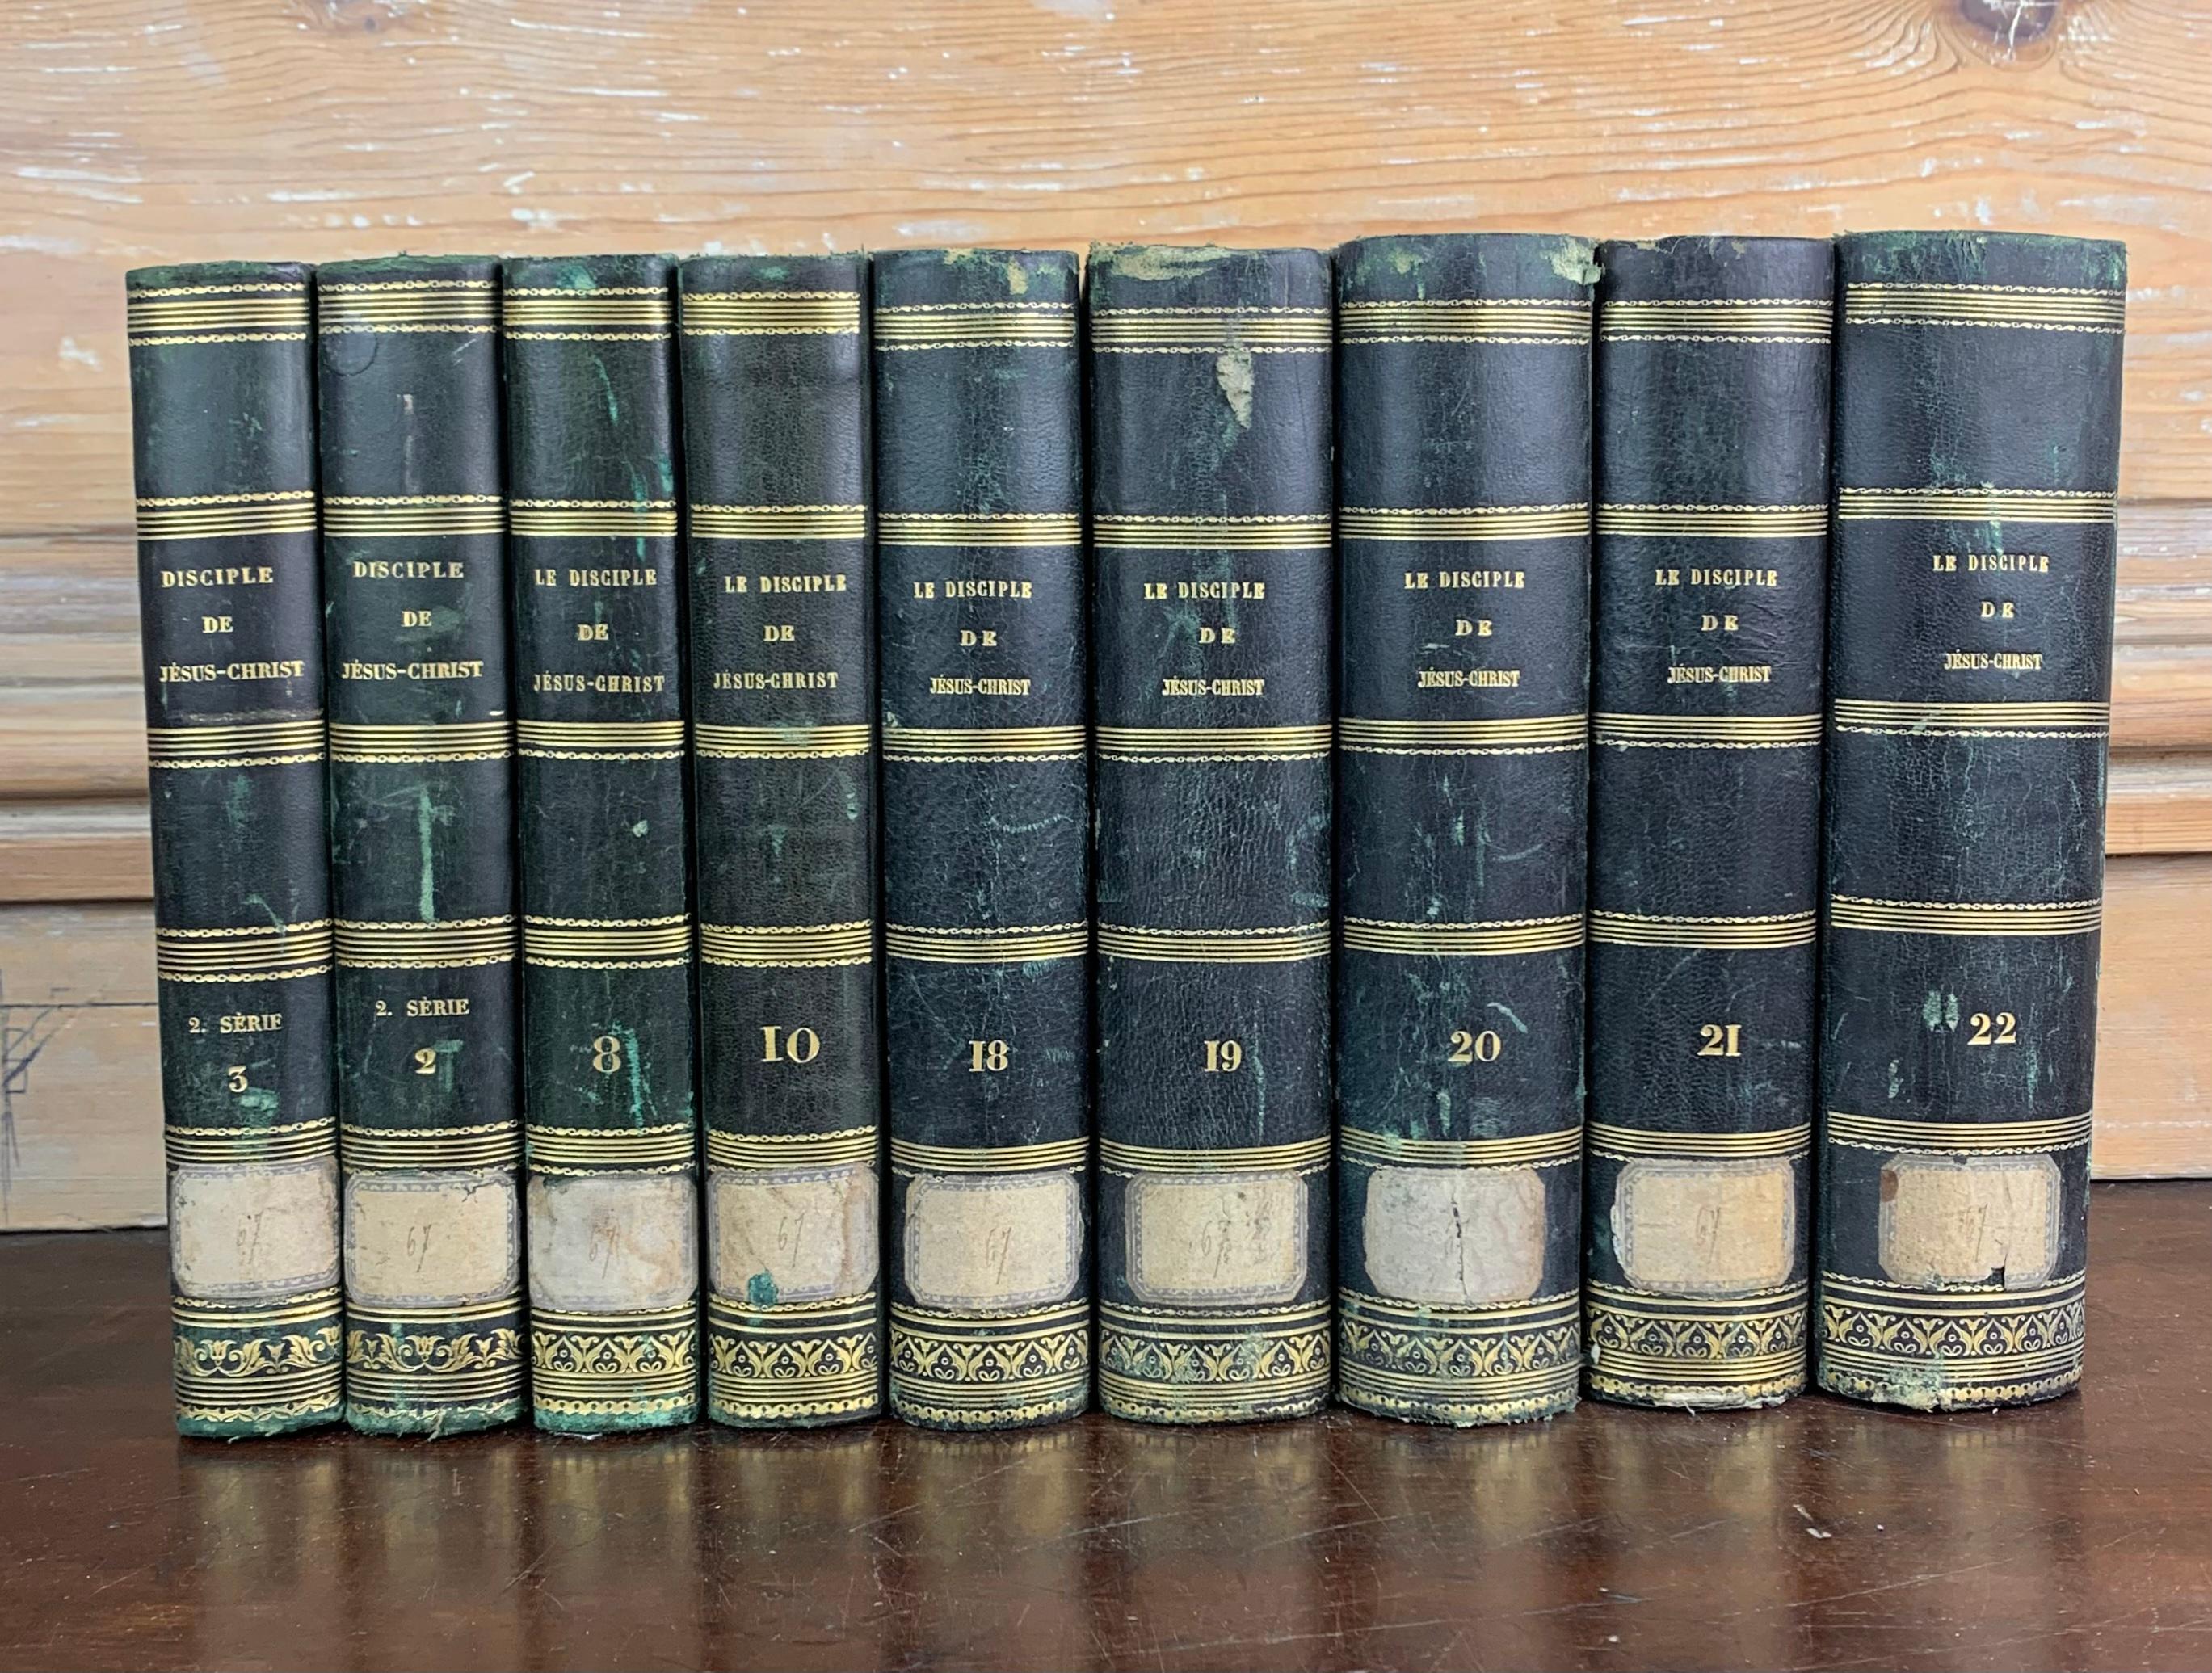 Set of old books dating from the 19th century. From an old protestant library near Le Havre in France. These books are called  « Disciple de Jésus Christ » (disciple of Jesus Christ). These beautiful books are perfect to fill a nice library.